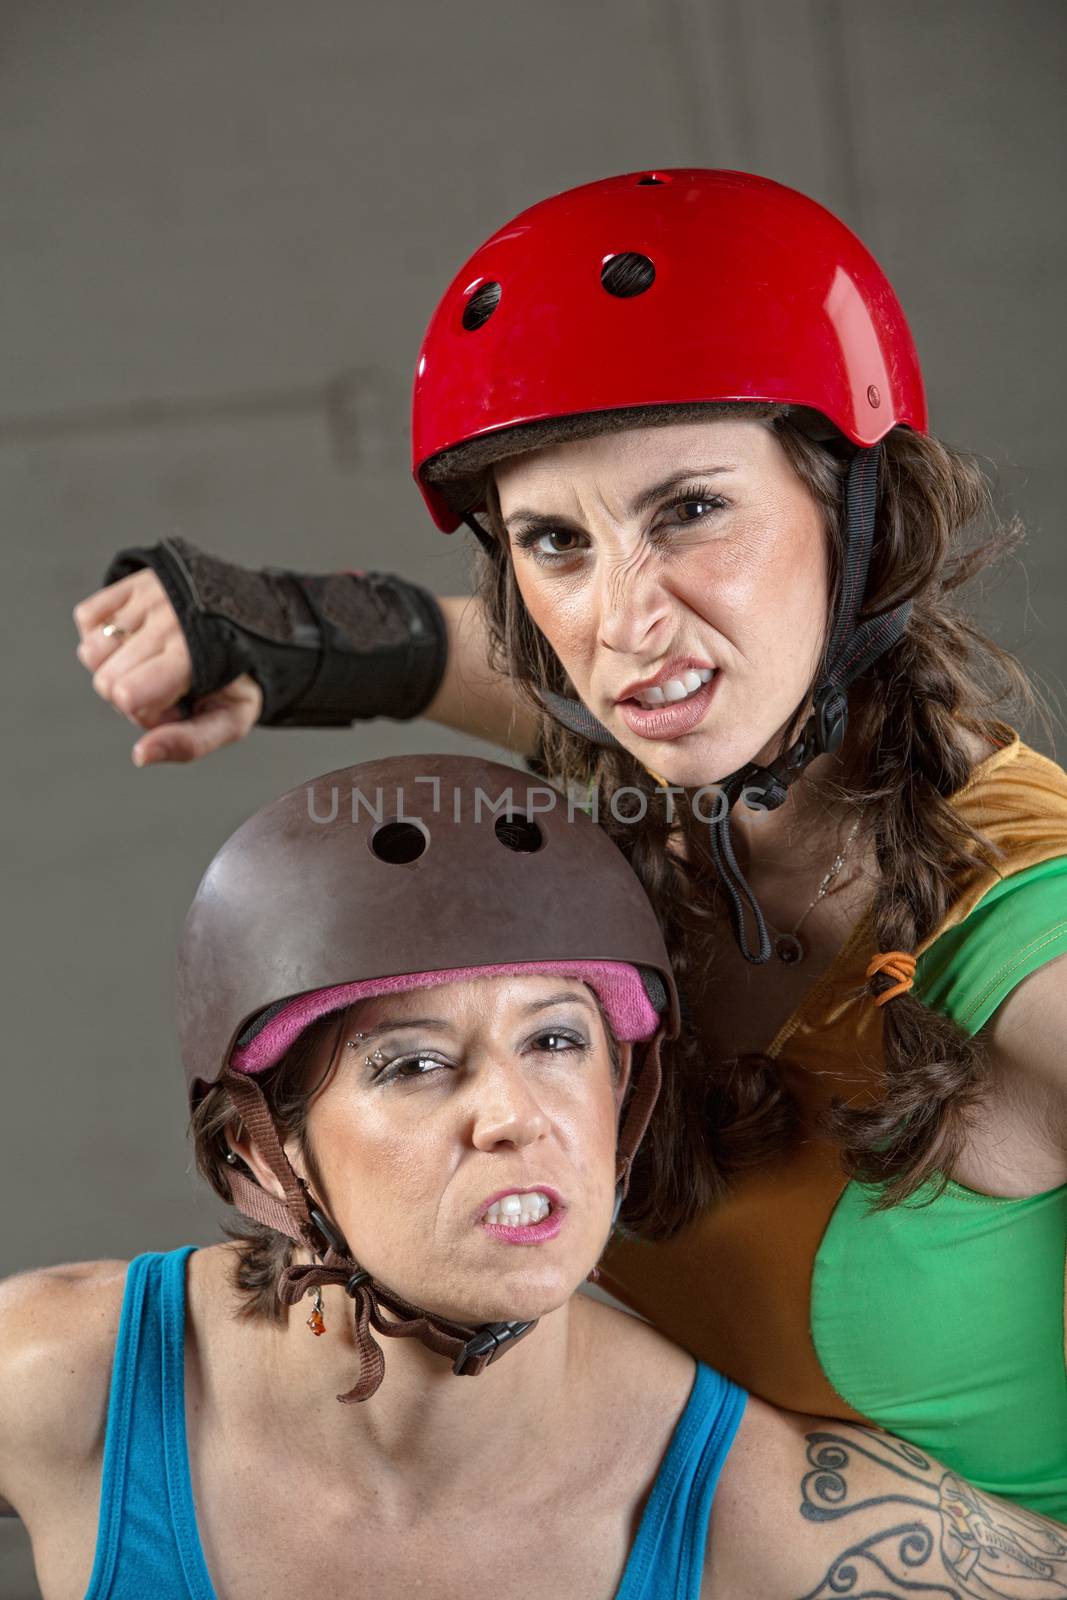 Two tough female roller derby skaters with clenched teeth